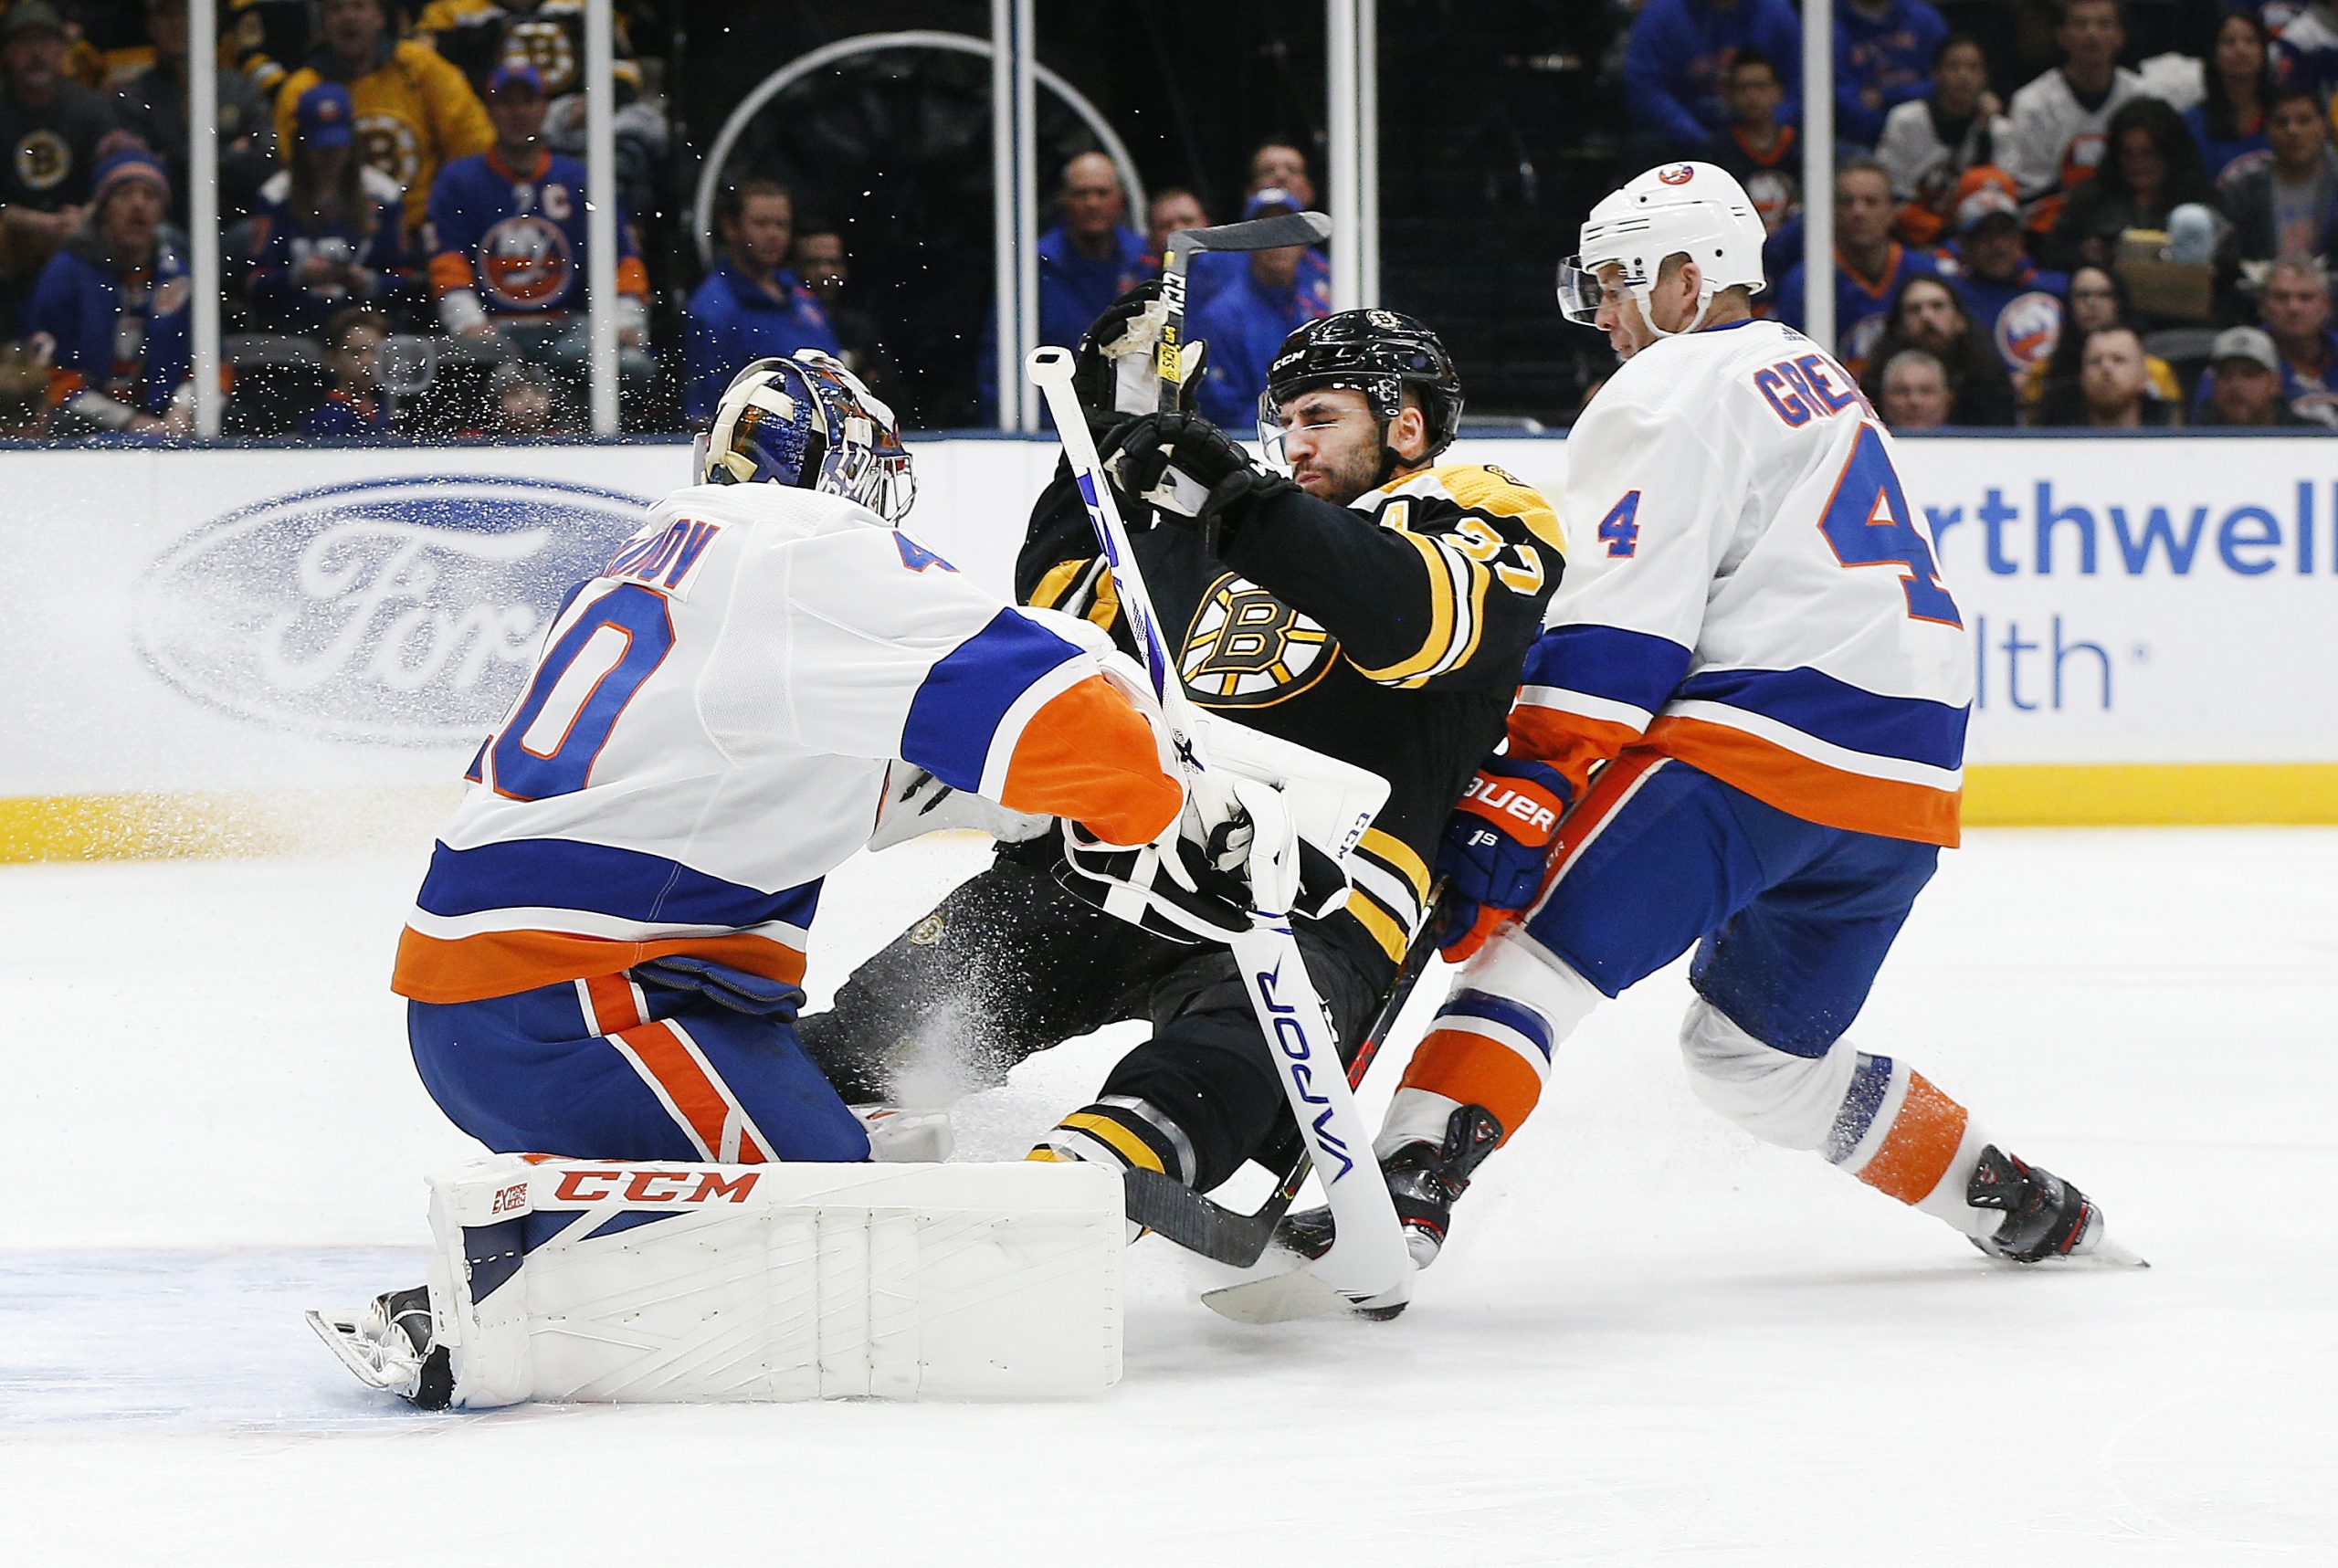 Feb 29, 2020; Uniondale, New York, USA; Boston Bruins center Patrice Bergeron (37) collides with New York Islanders goaltender Semyon Varlamov (40) during the first period at Nassau Veterans Memorial Coliseum. Mandatory Credit: Andy Marlin-USA TODAY Sports